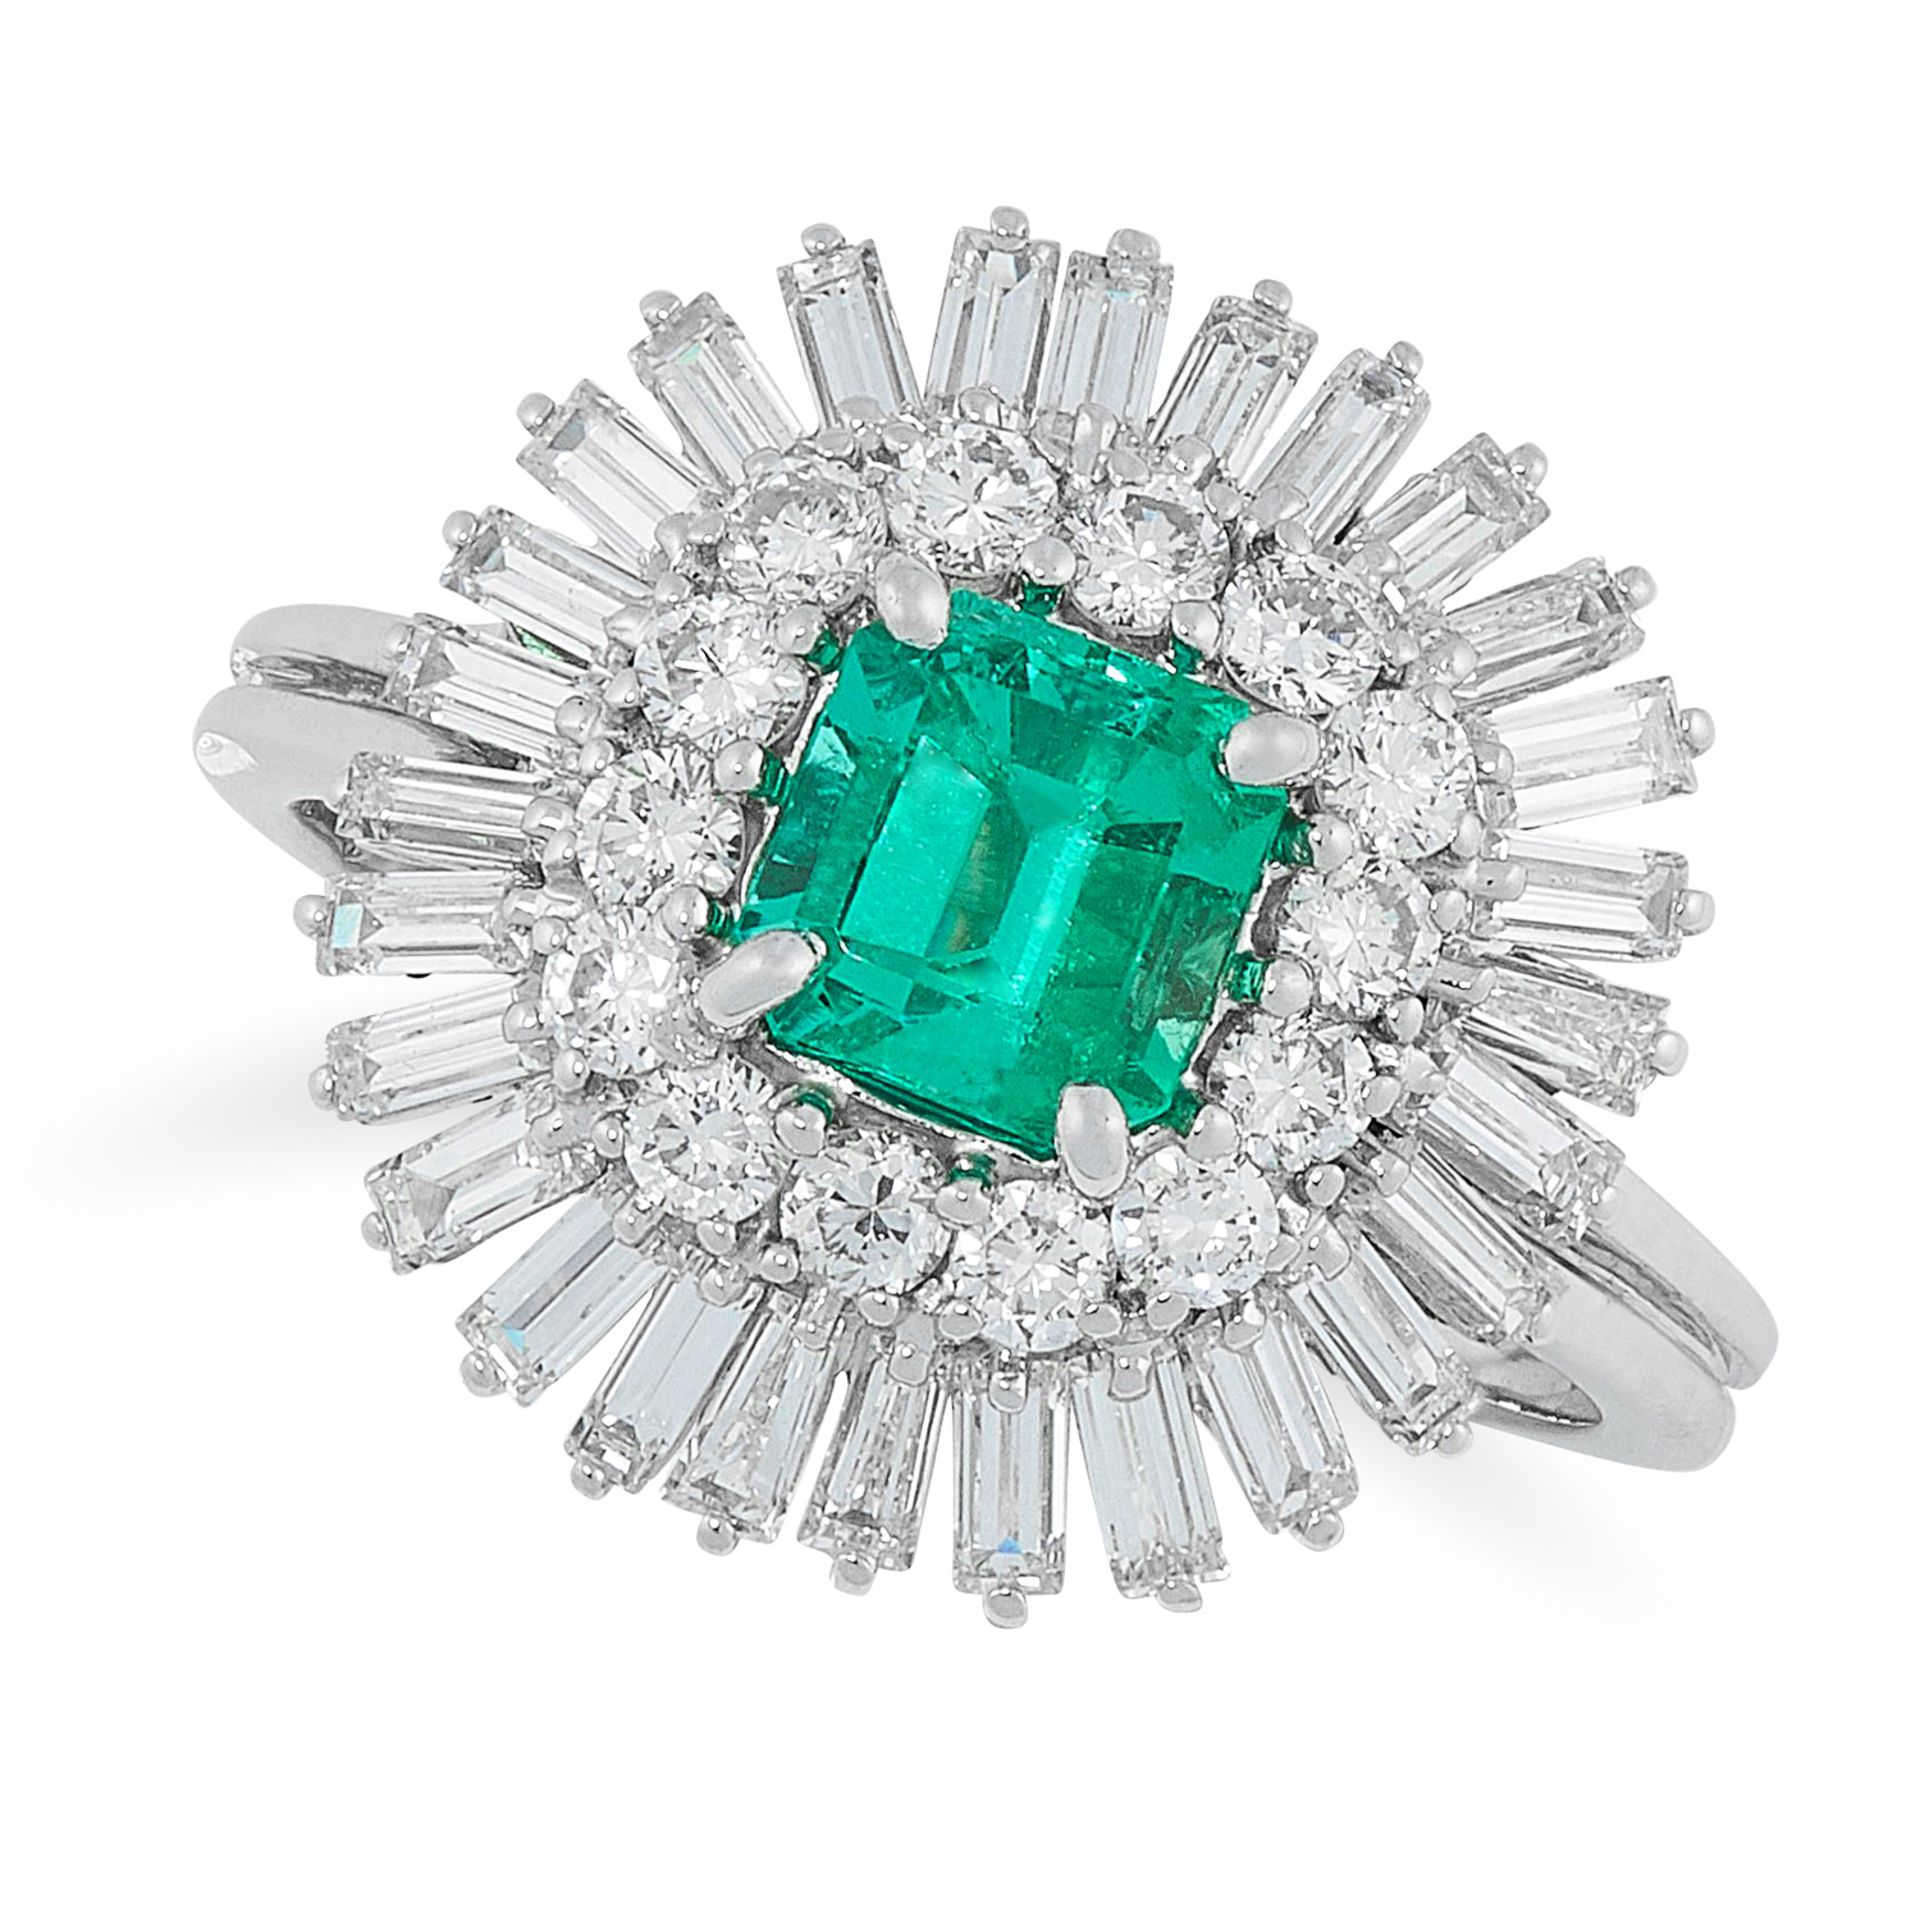 AN EMERALD AND DIAMOND CLUSTER RING comprising of